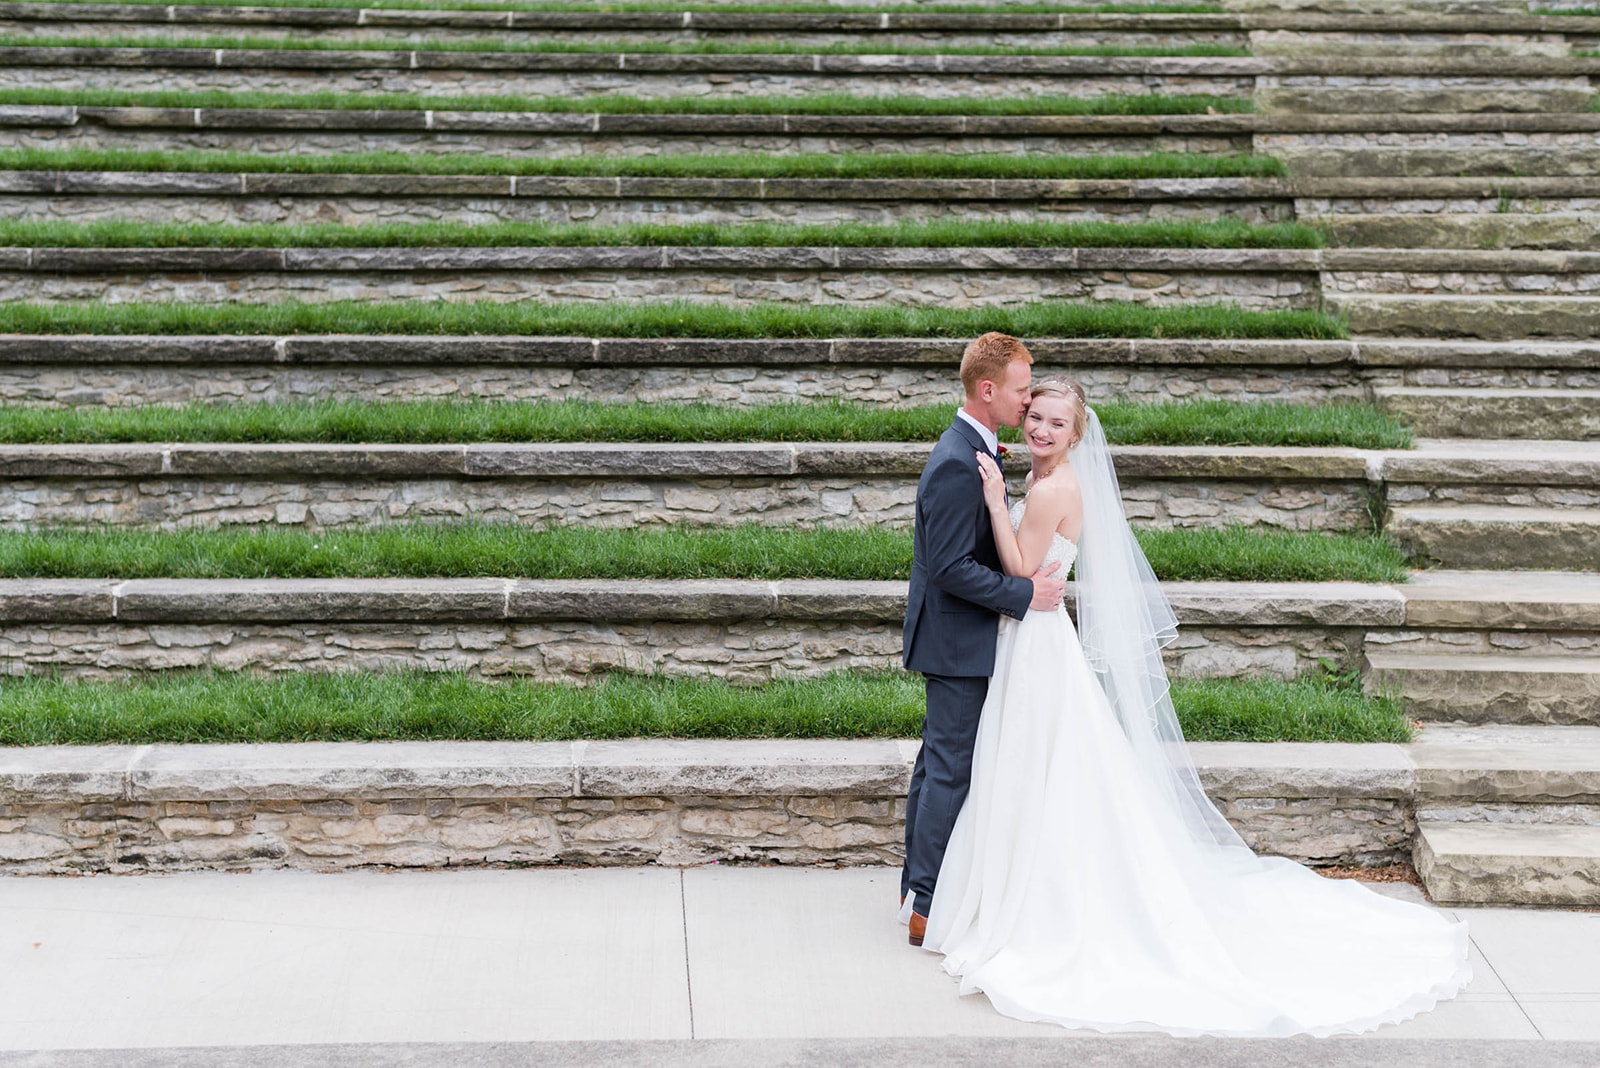 Summer Wedding at the OSU Faculty Club - Sarah and John Sweet Williams Photography, Nashville, Tennessee